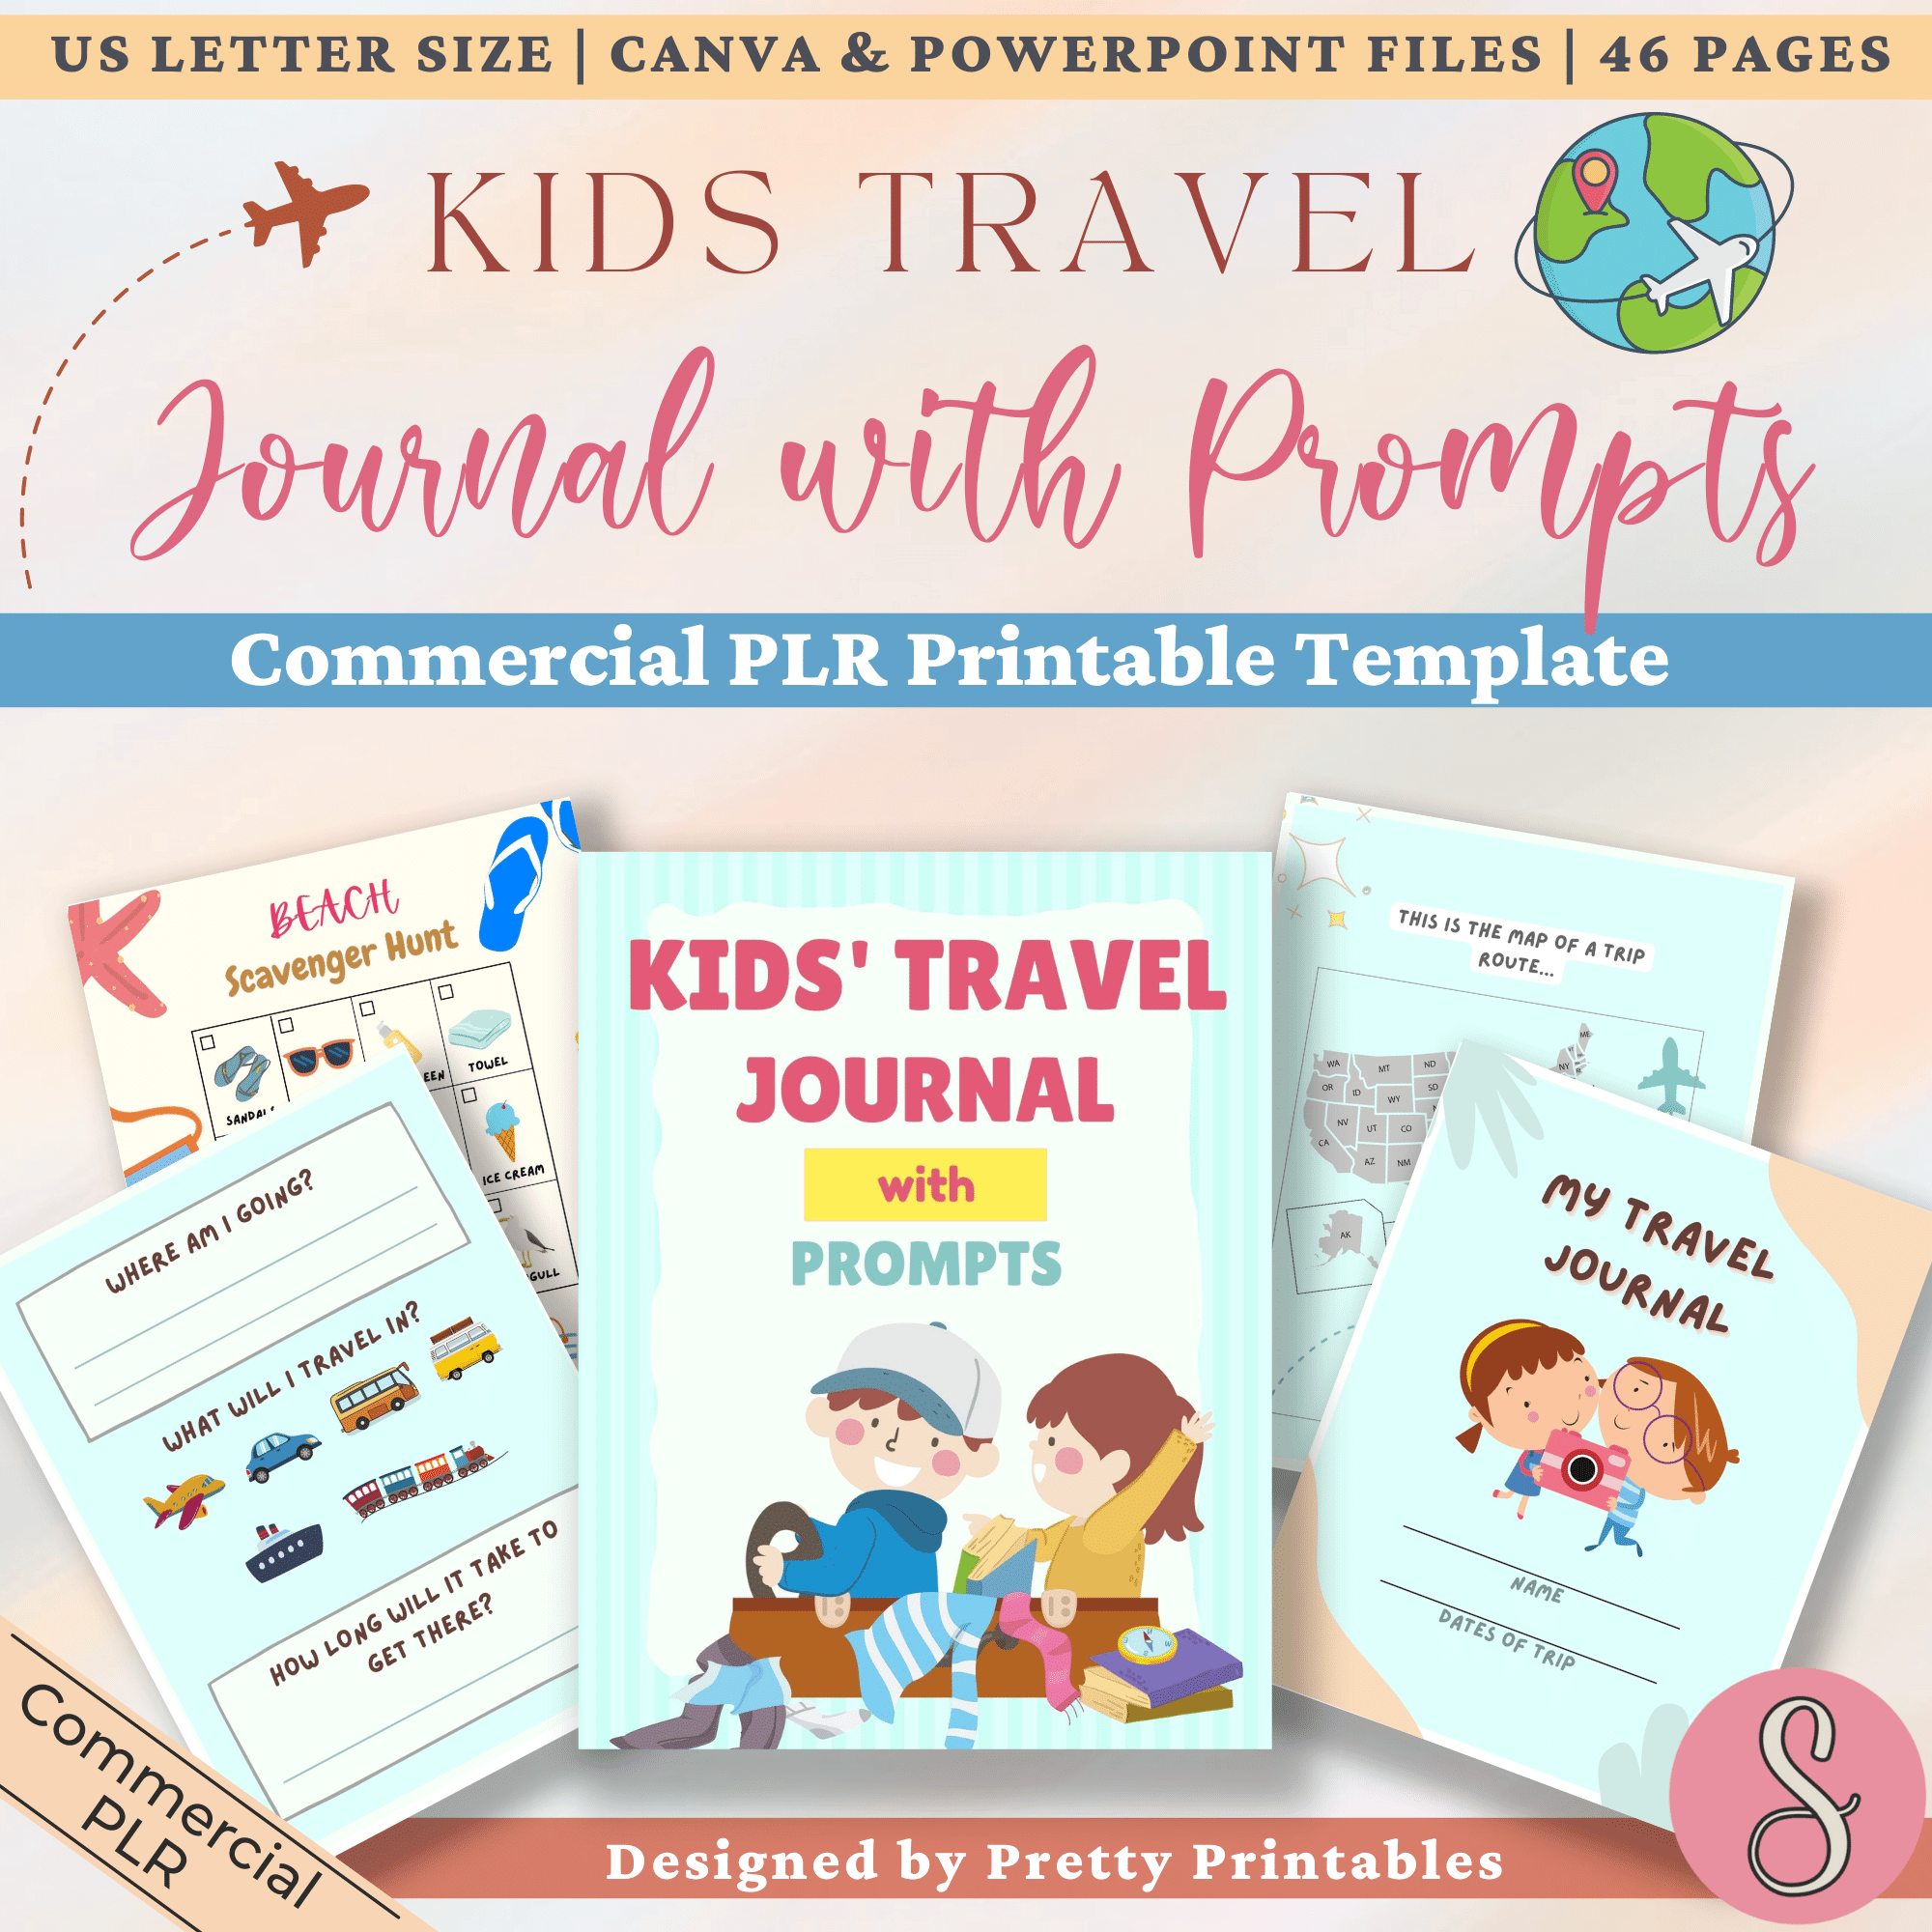 Kids’ Travel Journal with Prompts Commercial PLR Printable Template